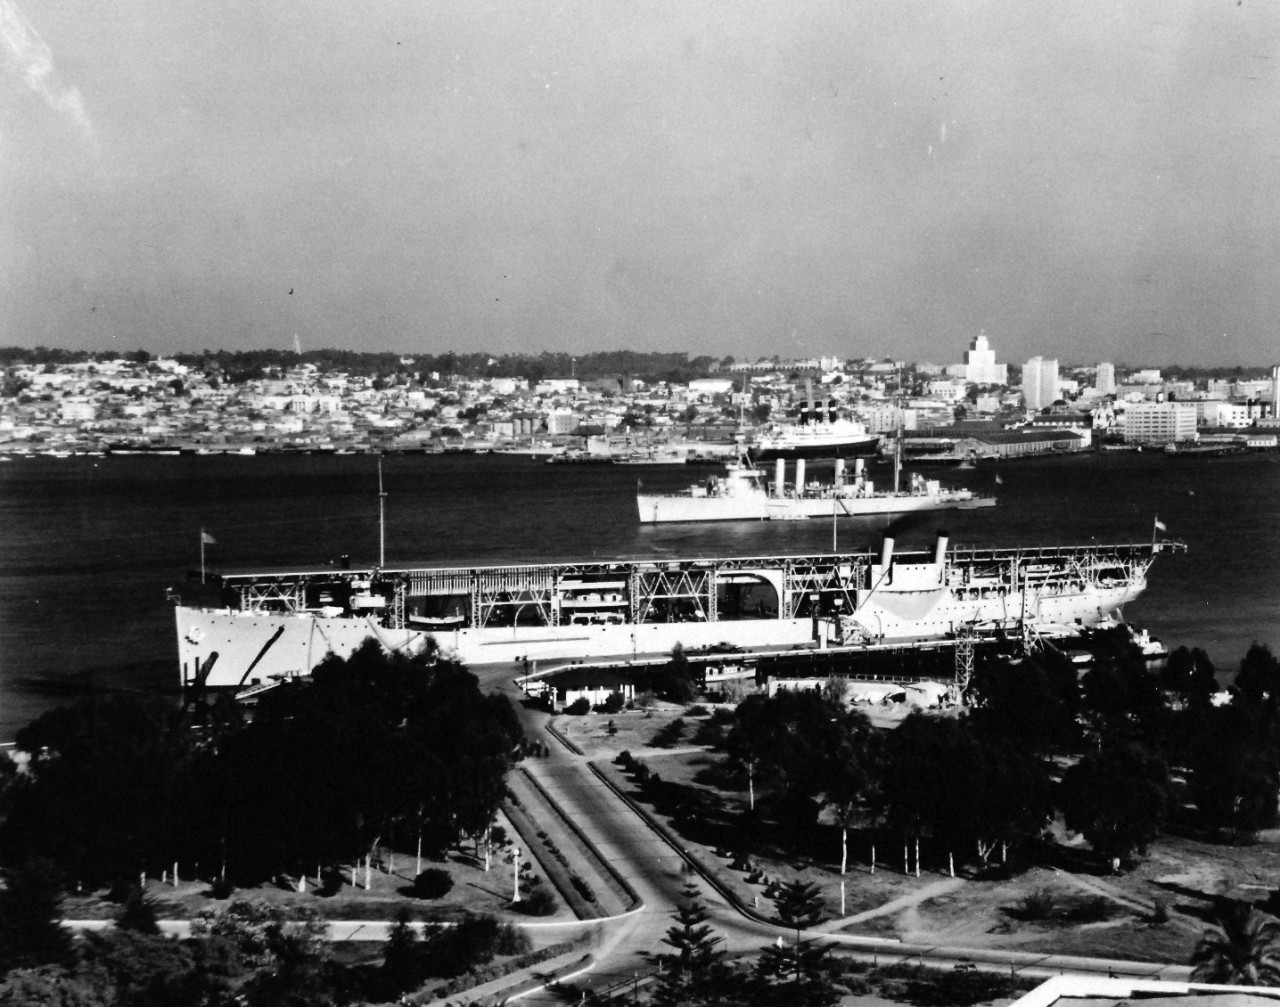 80-G-185892:   USS Langley (CV-1), 1931.    Langley in the foreground at San Diego, California, January 10, 1931.  Note the Red Star Liner Belgenland at Municipal Pier.  View taken from Air Tower at Naval Air Station, San Diego.  Official U.S. Navy photograph, now in the collections of the National Archives.  (2015/12/22). 